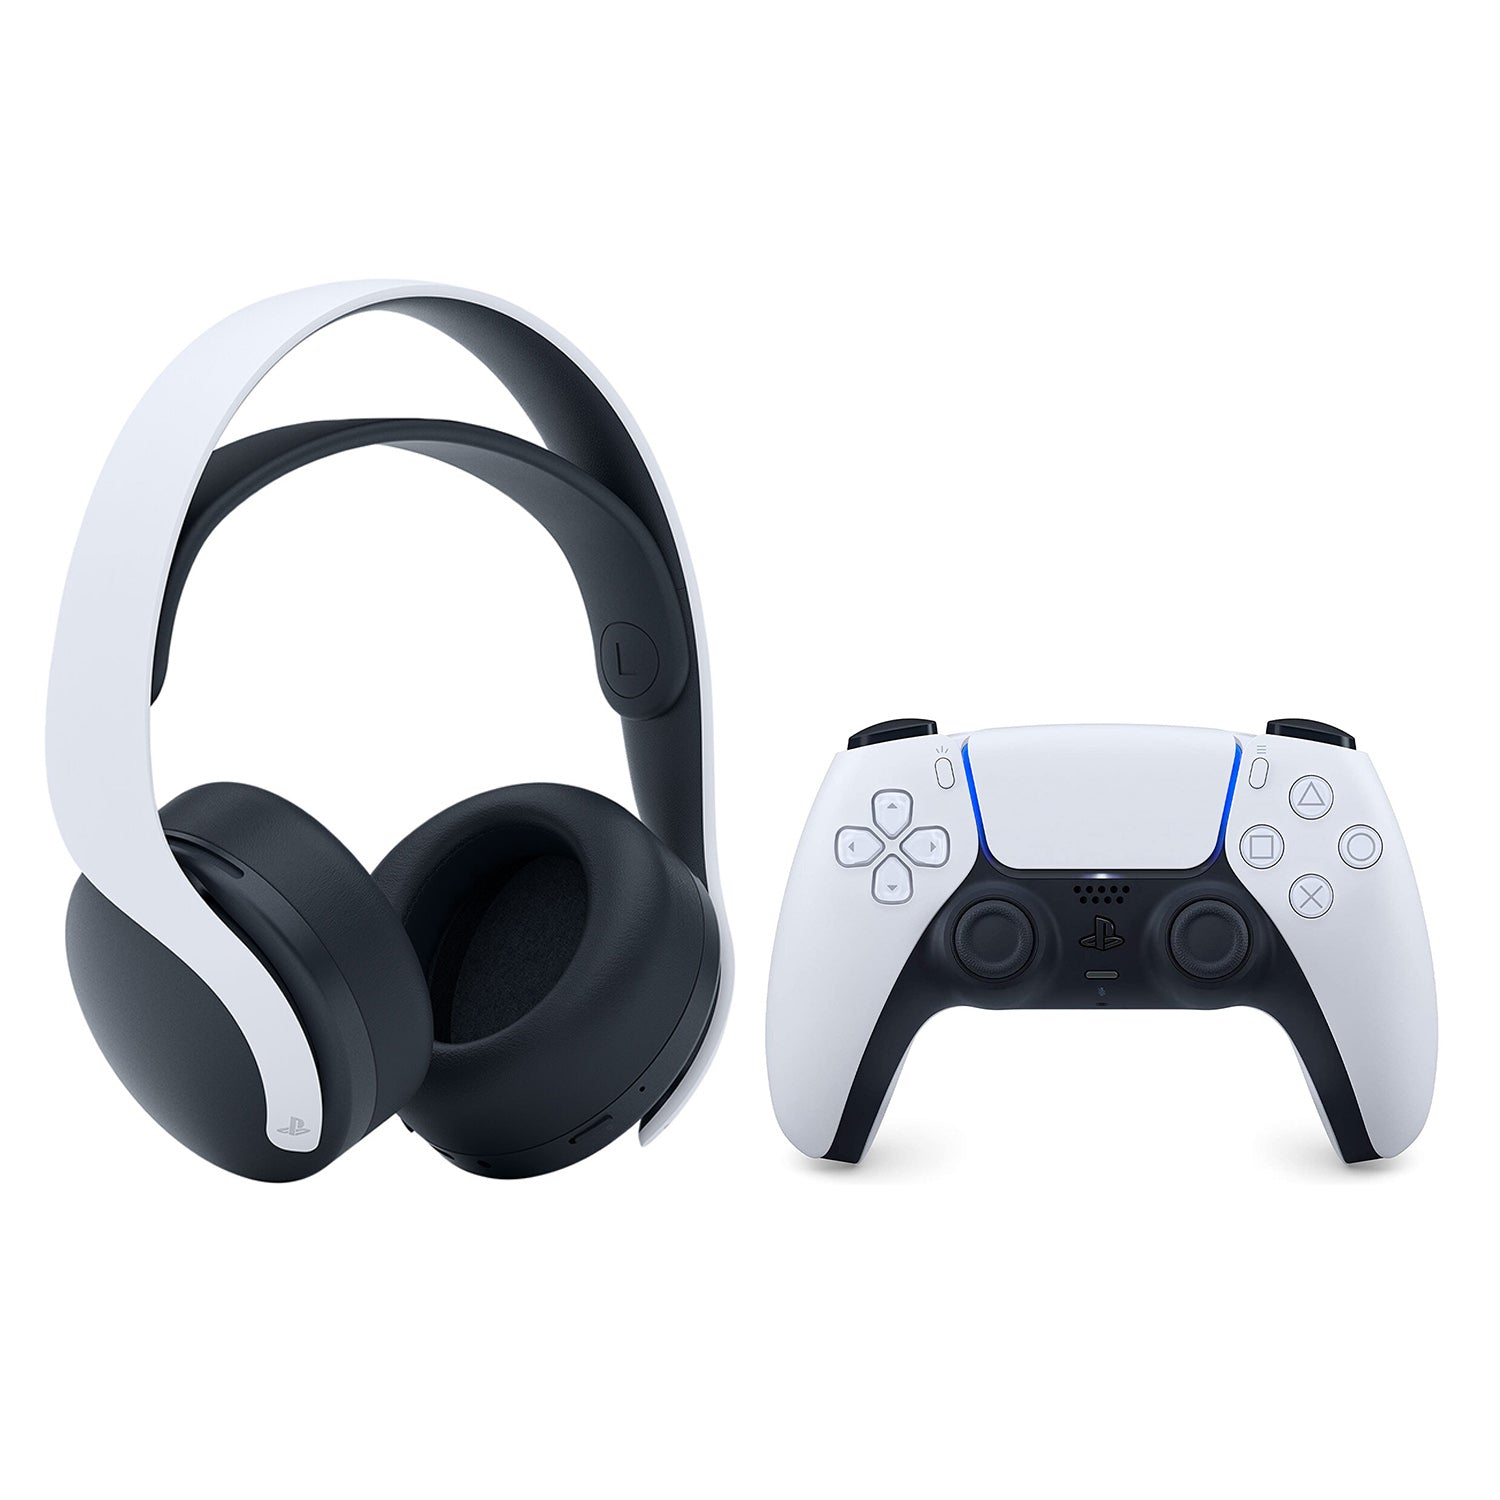 Sony PlayStation 5 PULSE 3D Wireless Gaming Headset and DualSense Controller Bundle - Glacier White - Pro-Distributing